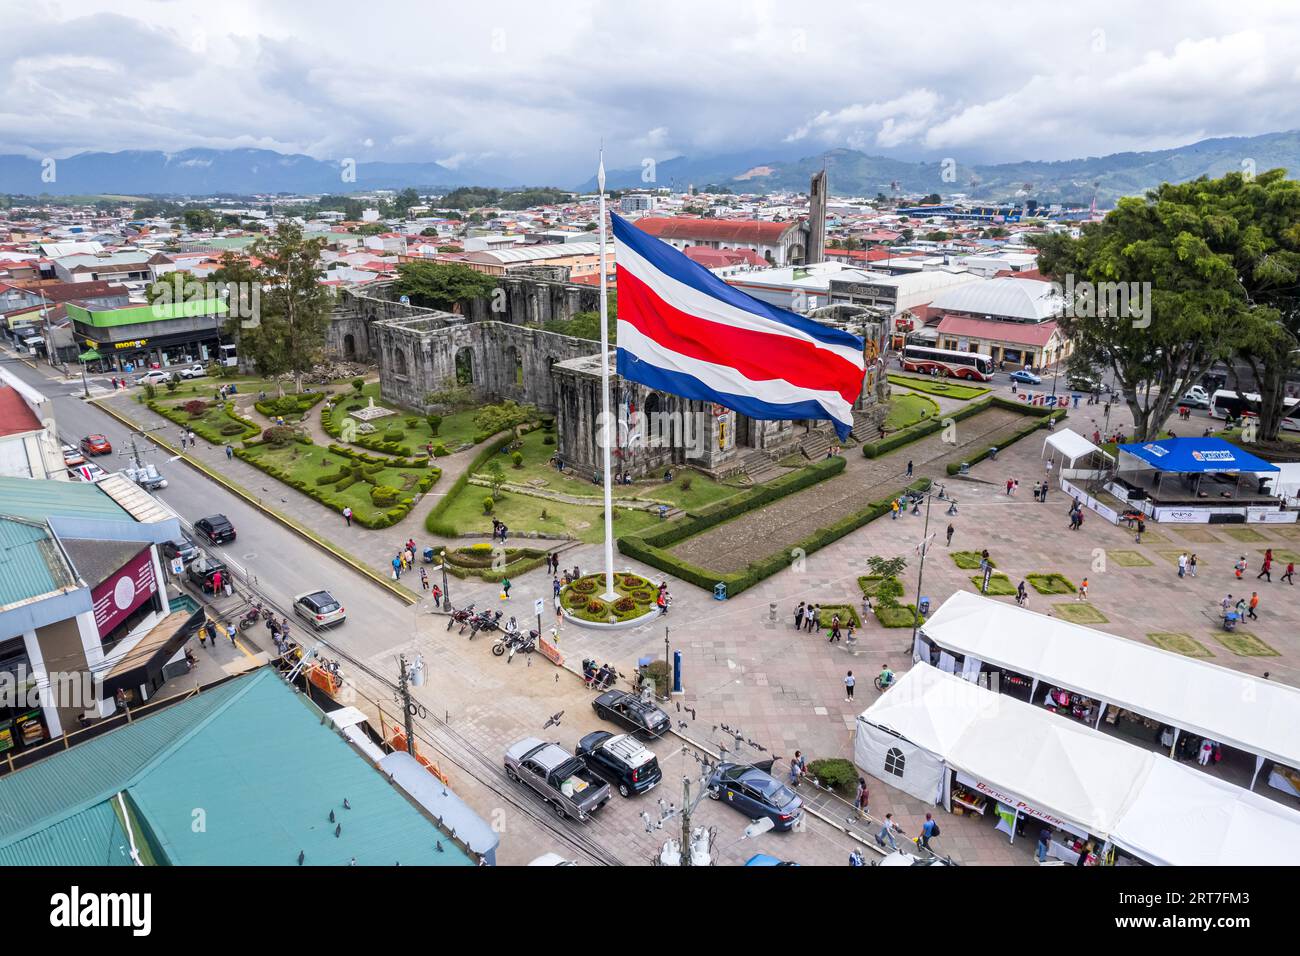 Beautiful View of the Costa Rica Flag with the Bicentennial Angel in Cartago, next to the Ruins and the basilica - Costa Rica Patriotic Symbols Stock Photo